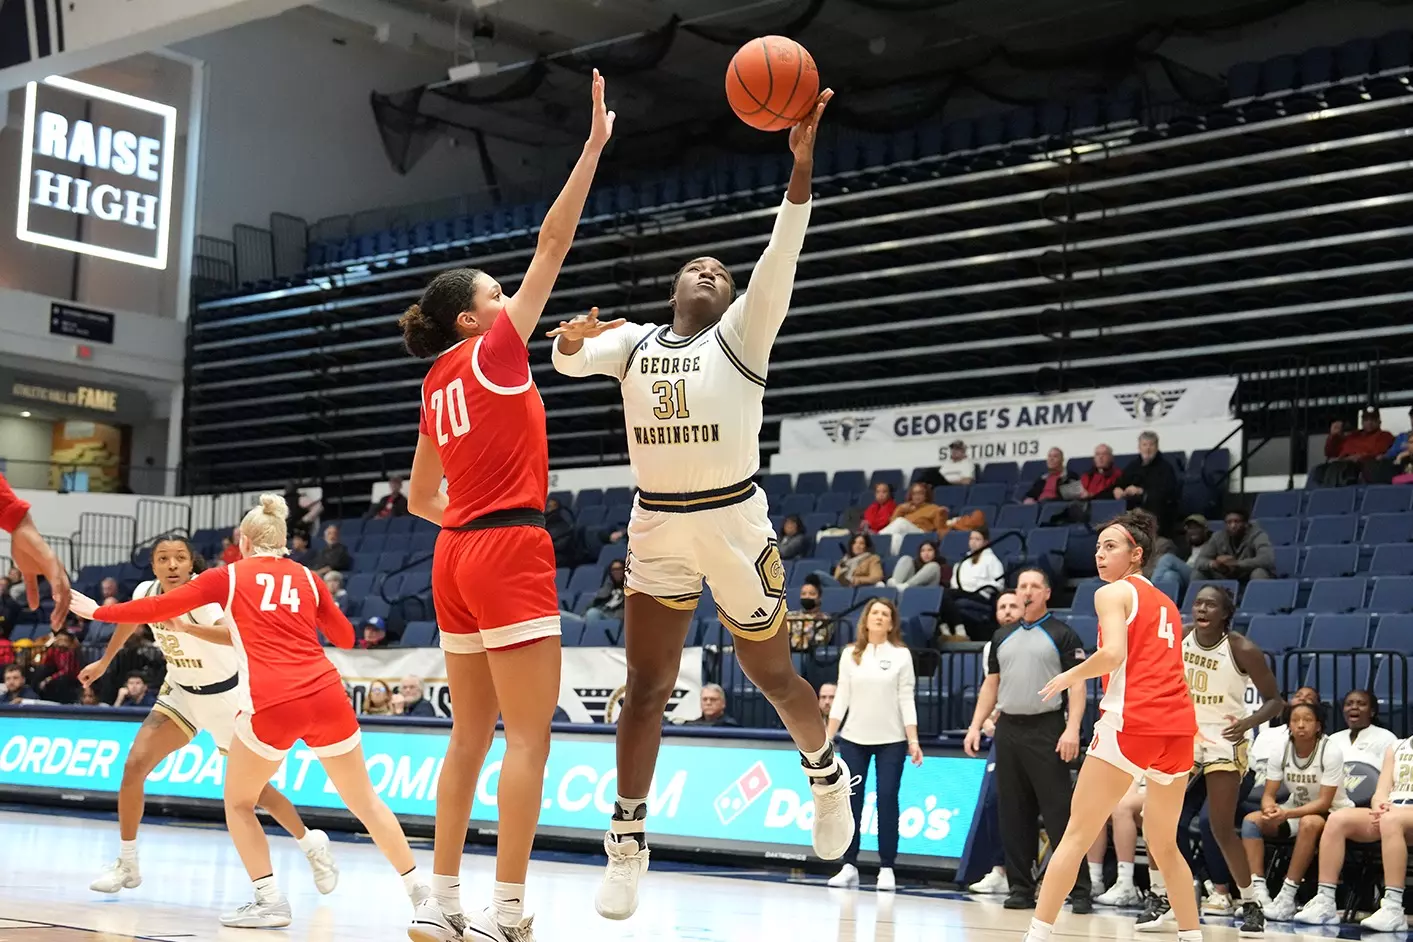 Women’s Basketball’s Offensive Woes Continue in 71-54 Loss to Duquesne